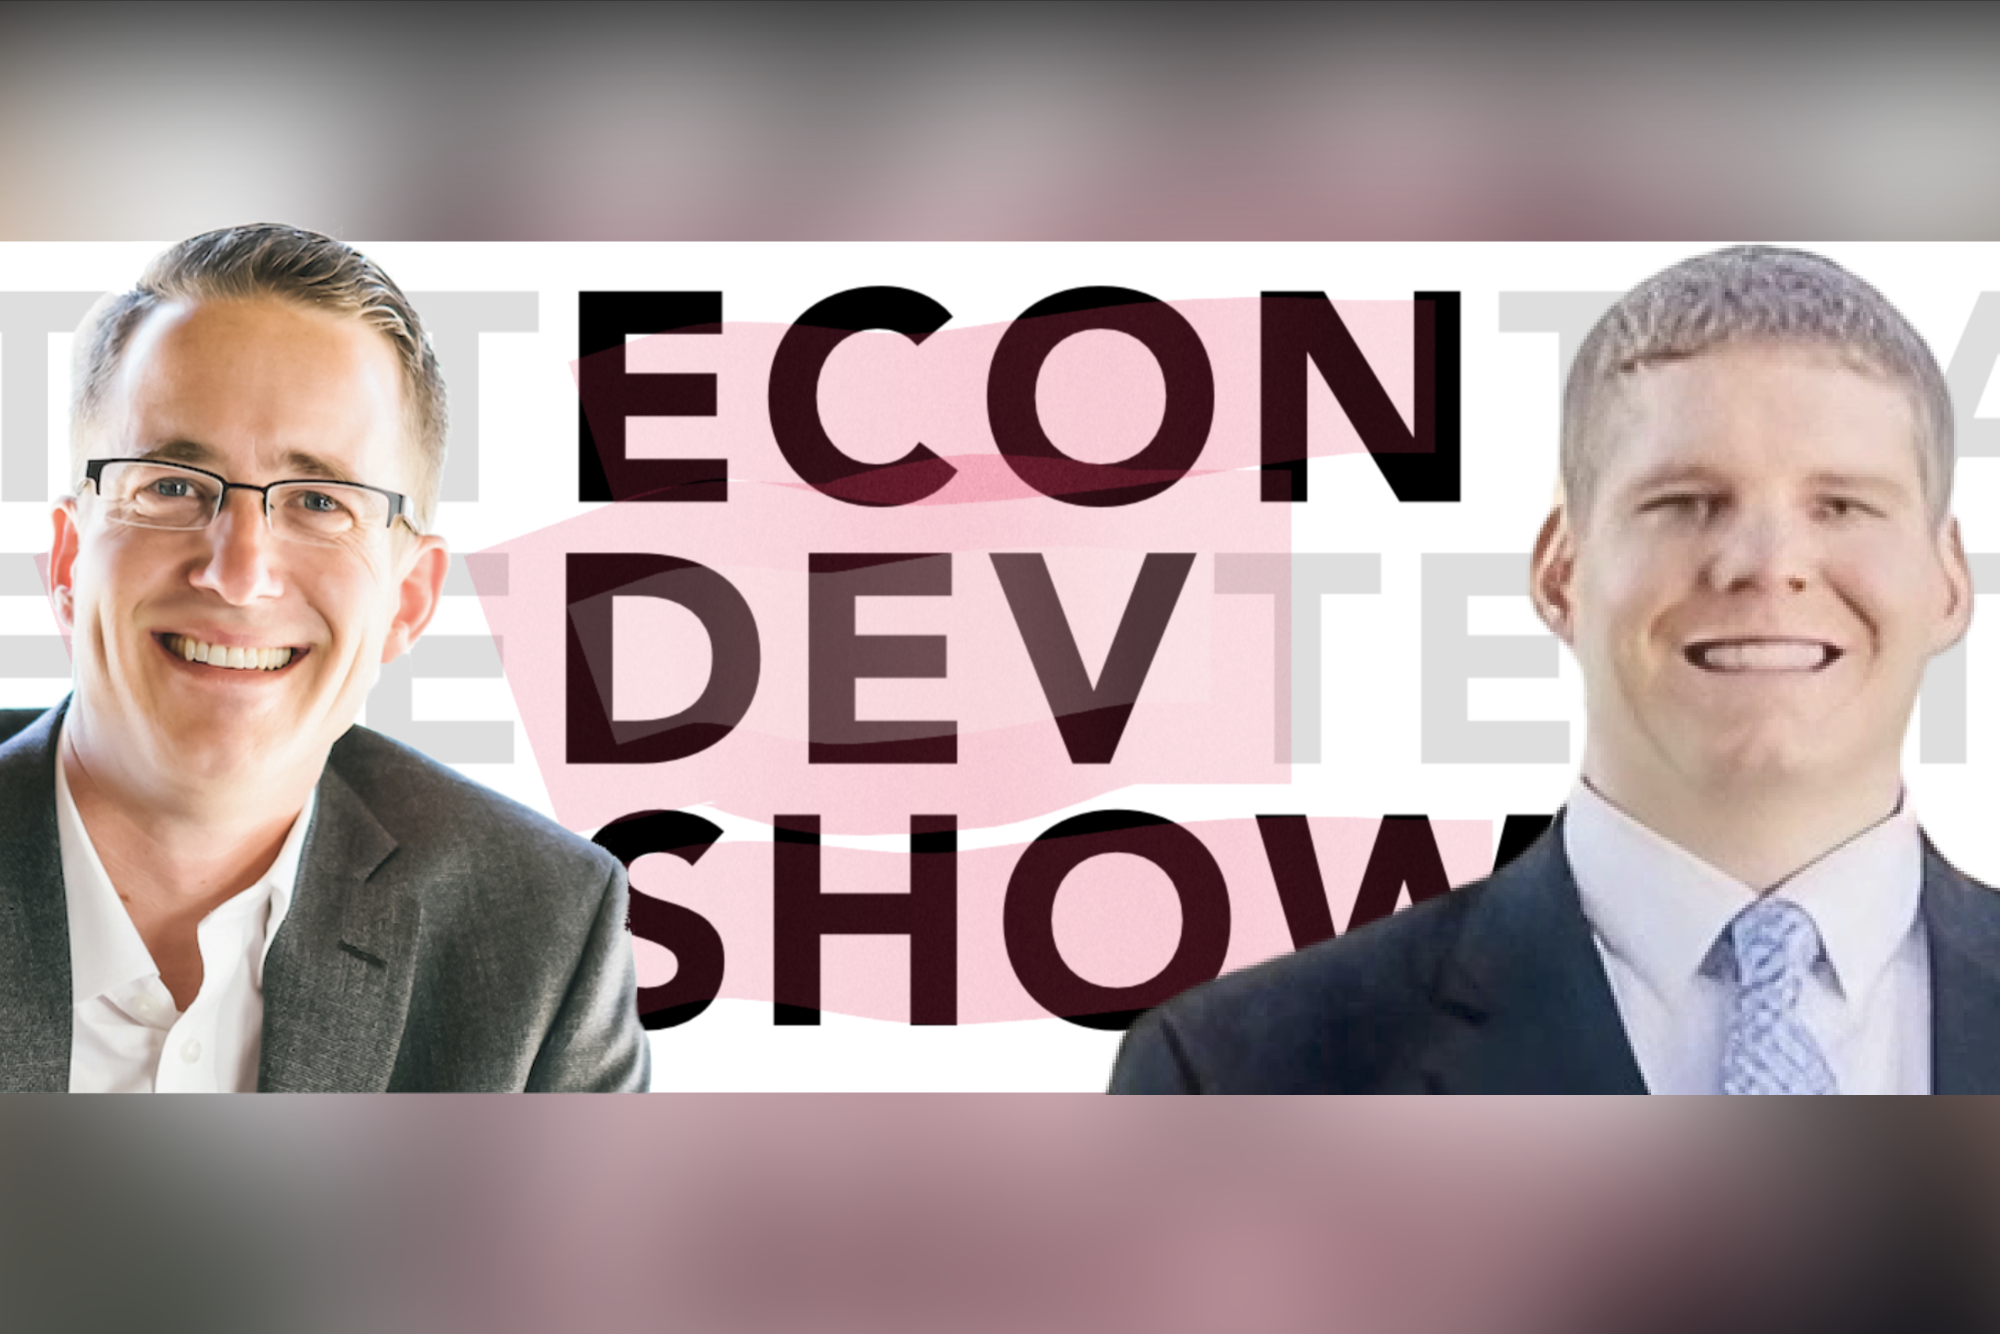 Podcast Episode # 107 - Meet Joe Collins: The First Subscriber to the Econ Dev Show